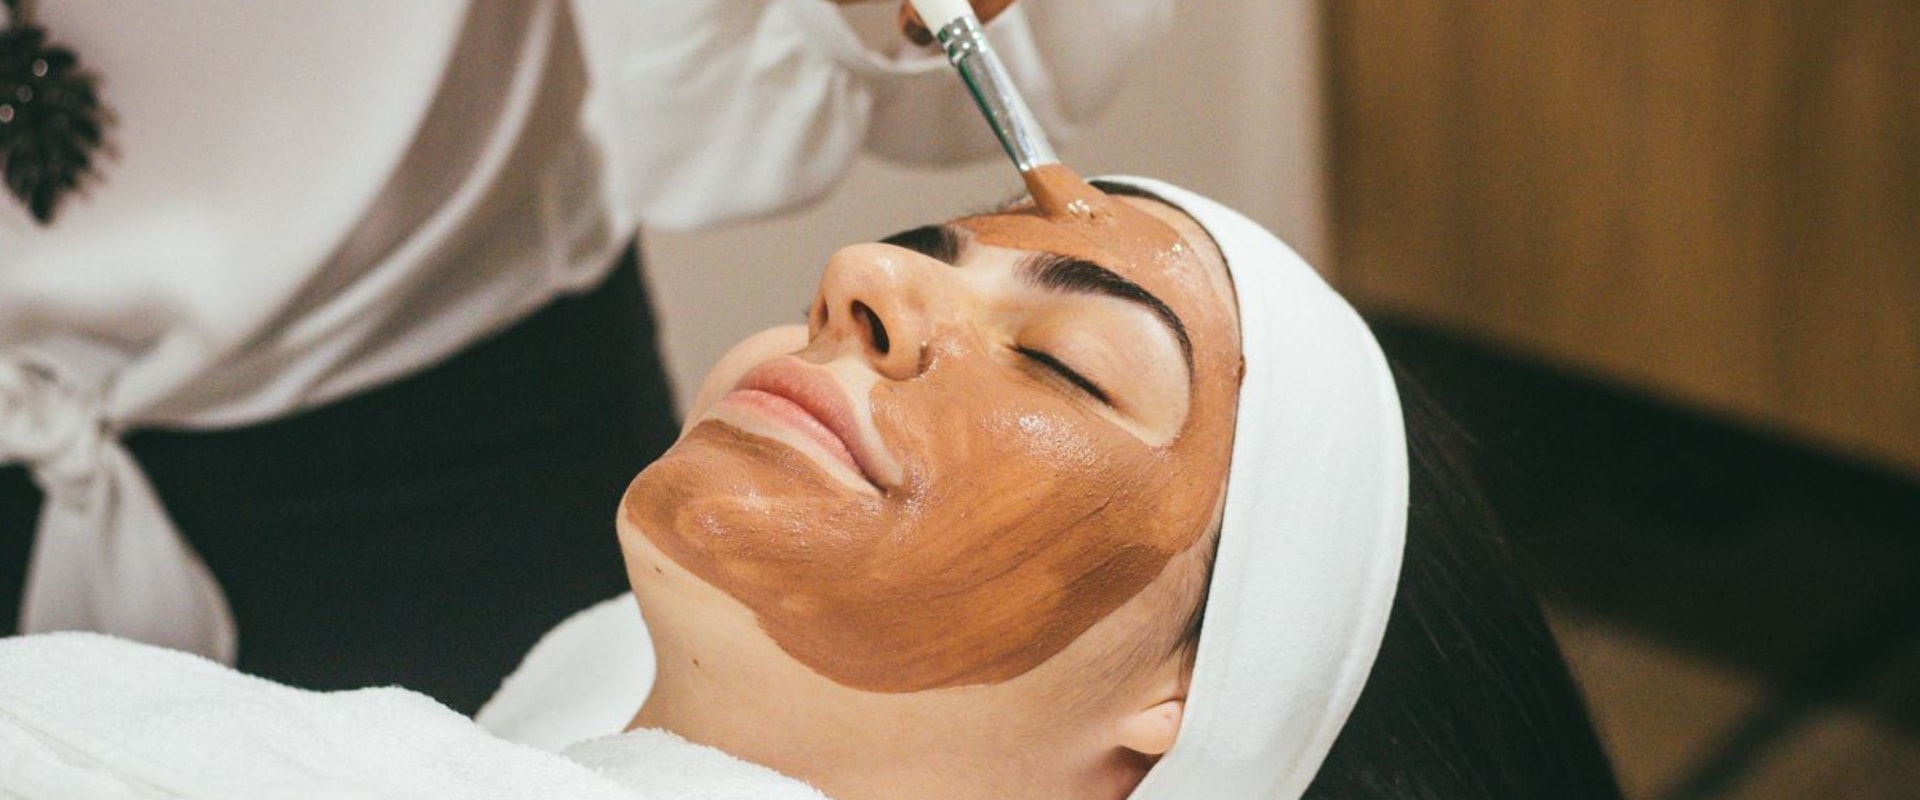 5 Most Cost-Effective Beauty Treatments to Make Money